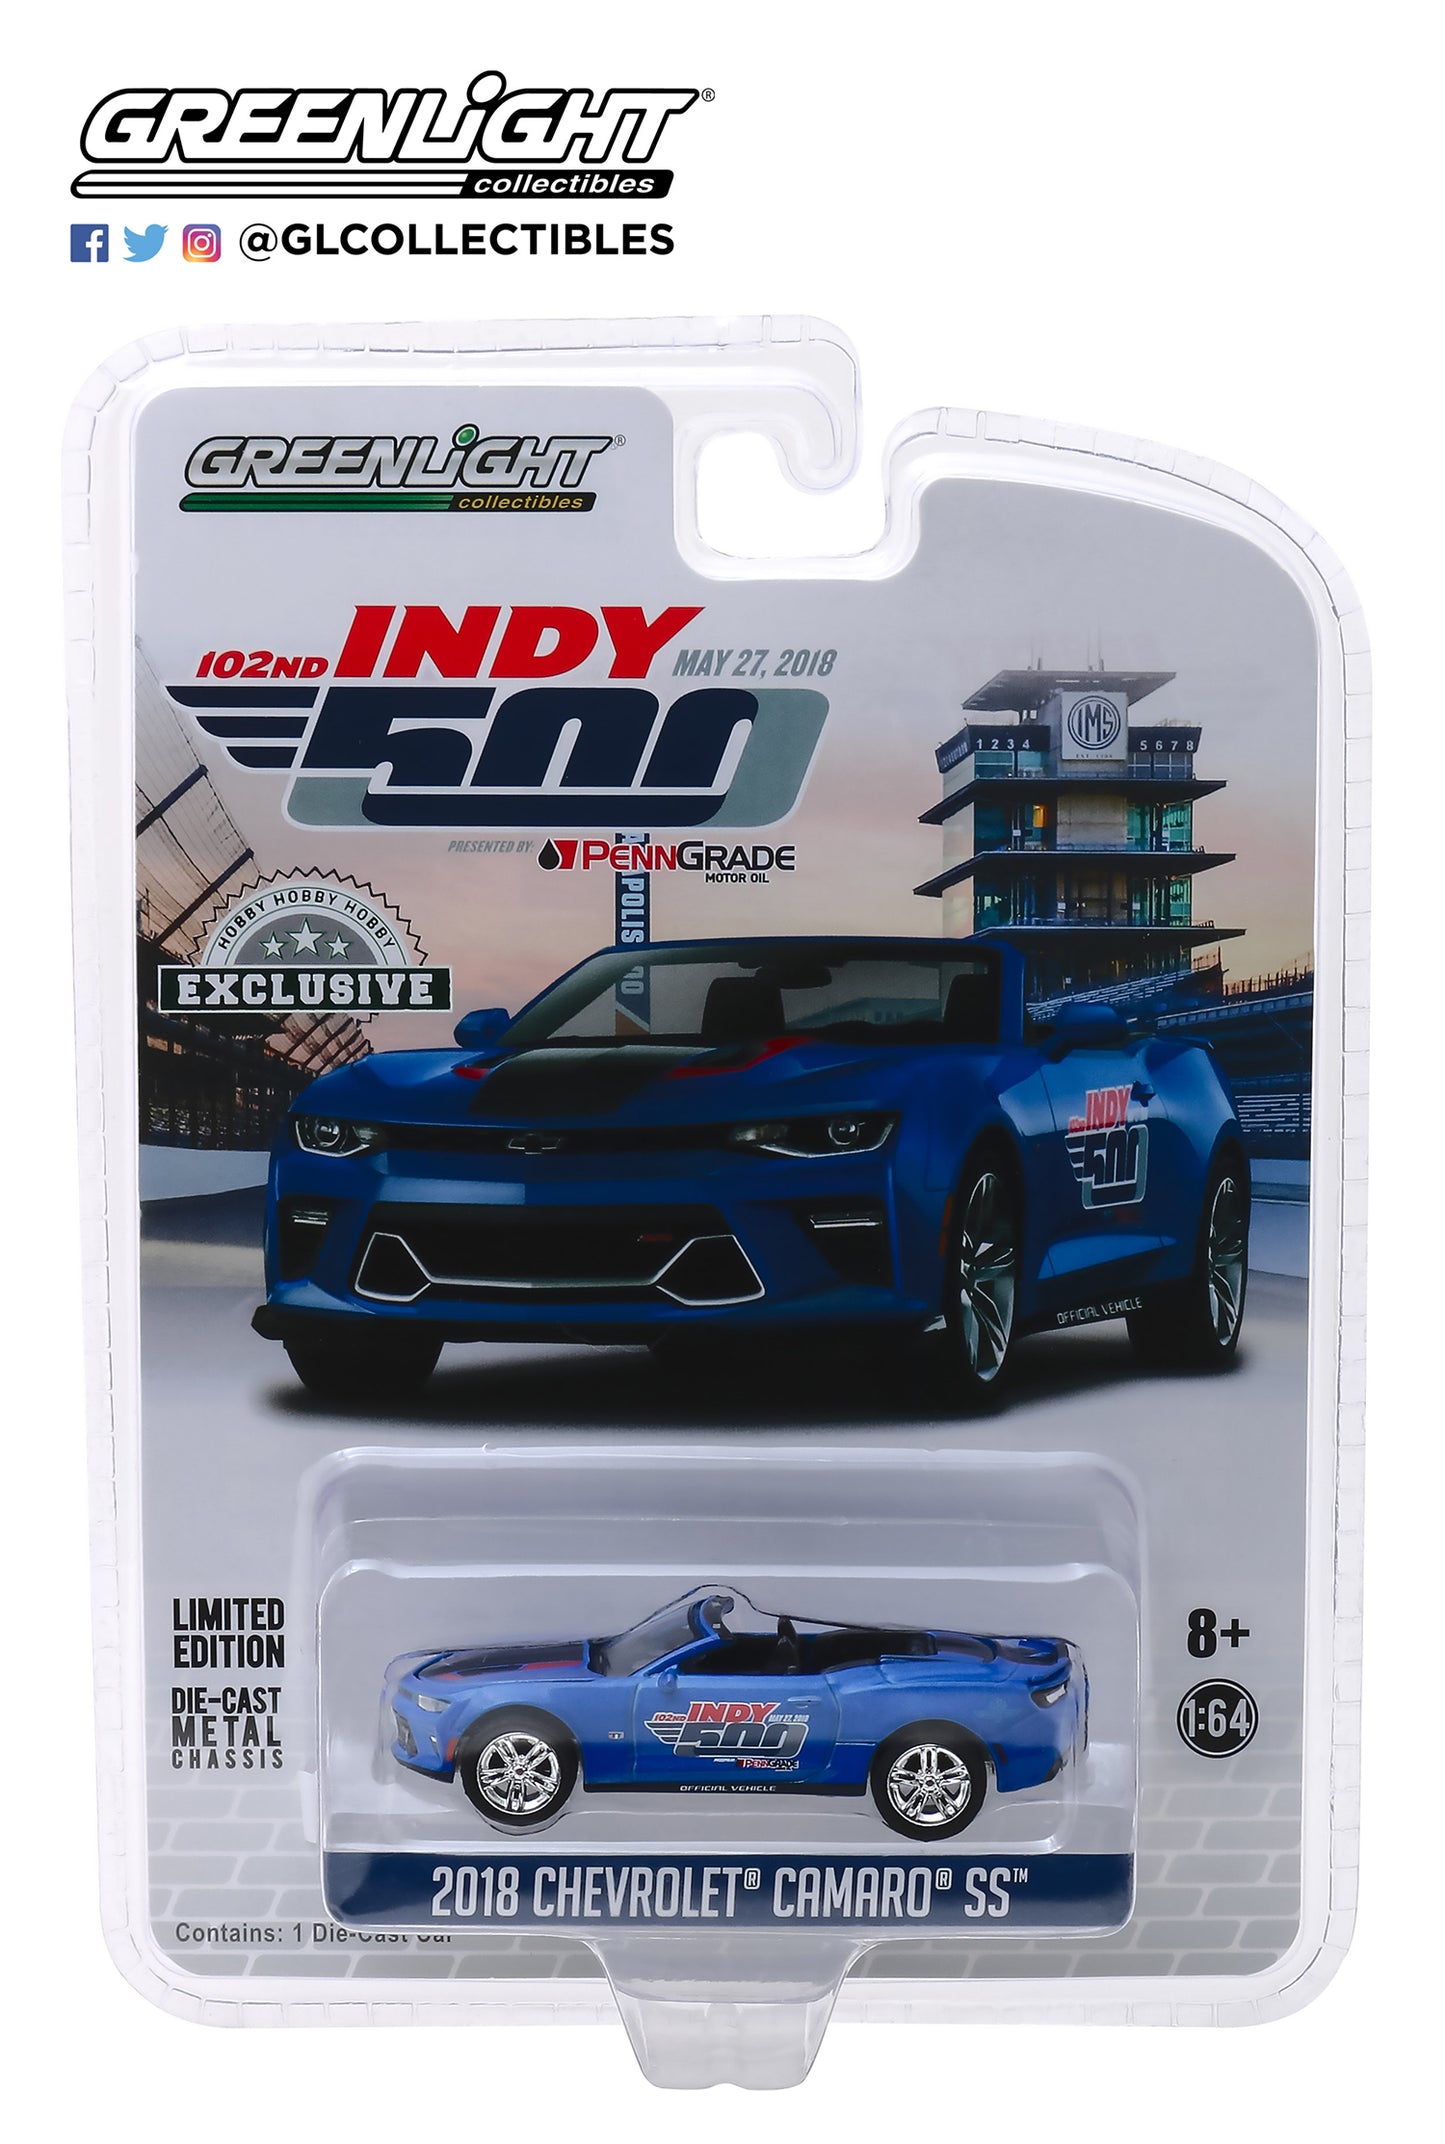 GreenLight 1/64 2018 Chevrolet Camaro Convertible - 102nd Indy 500 Presented by PennGrade Motor Oil 500 Festival Event Car 30004